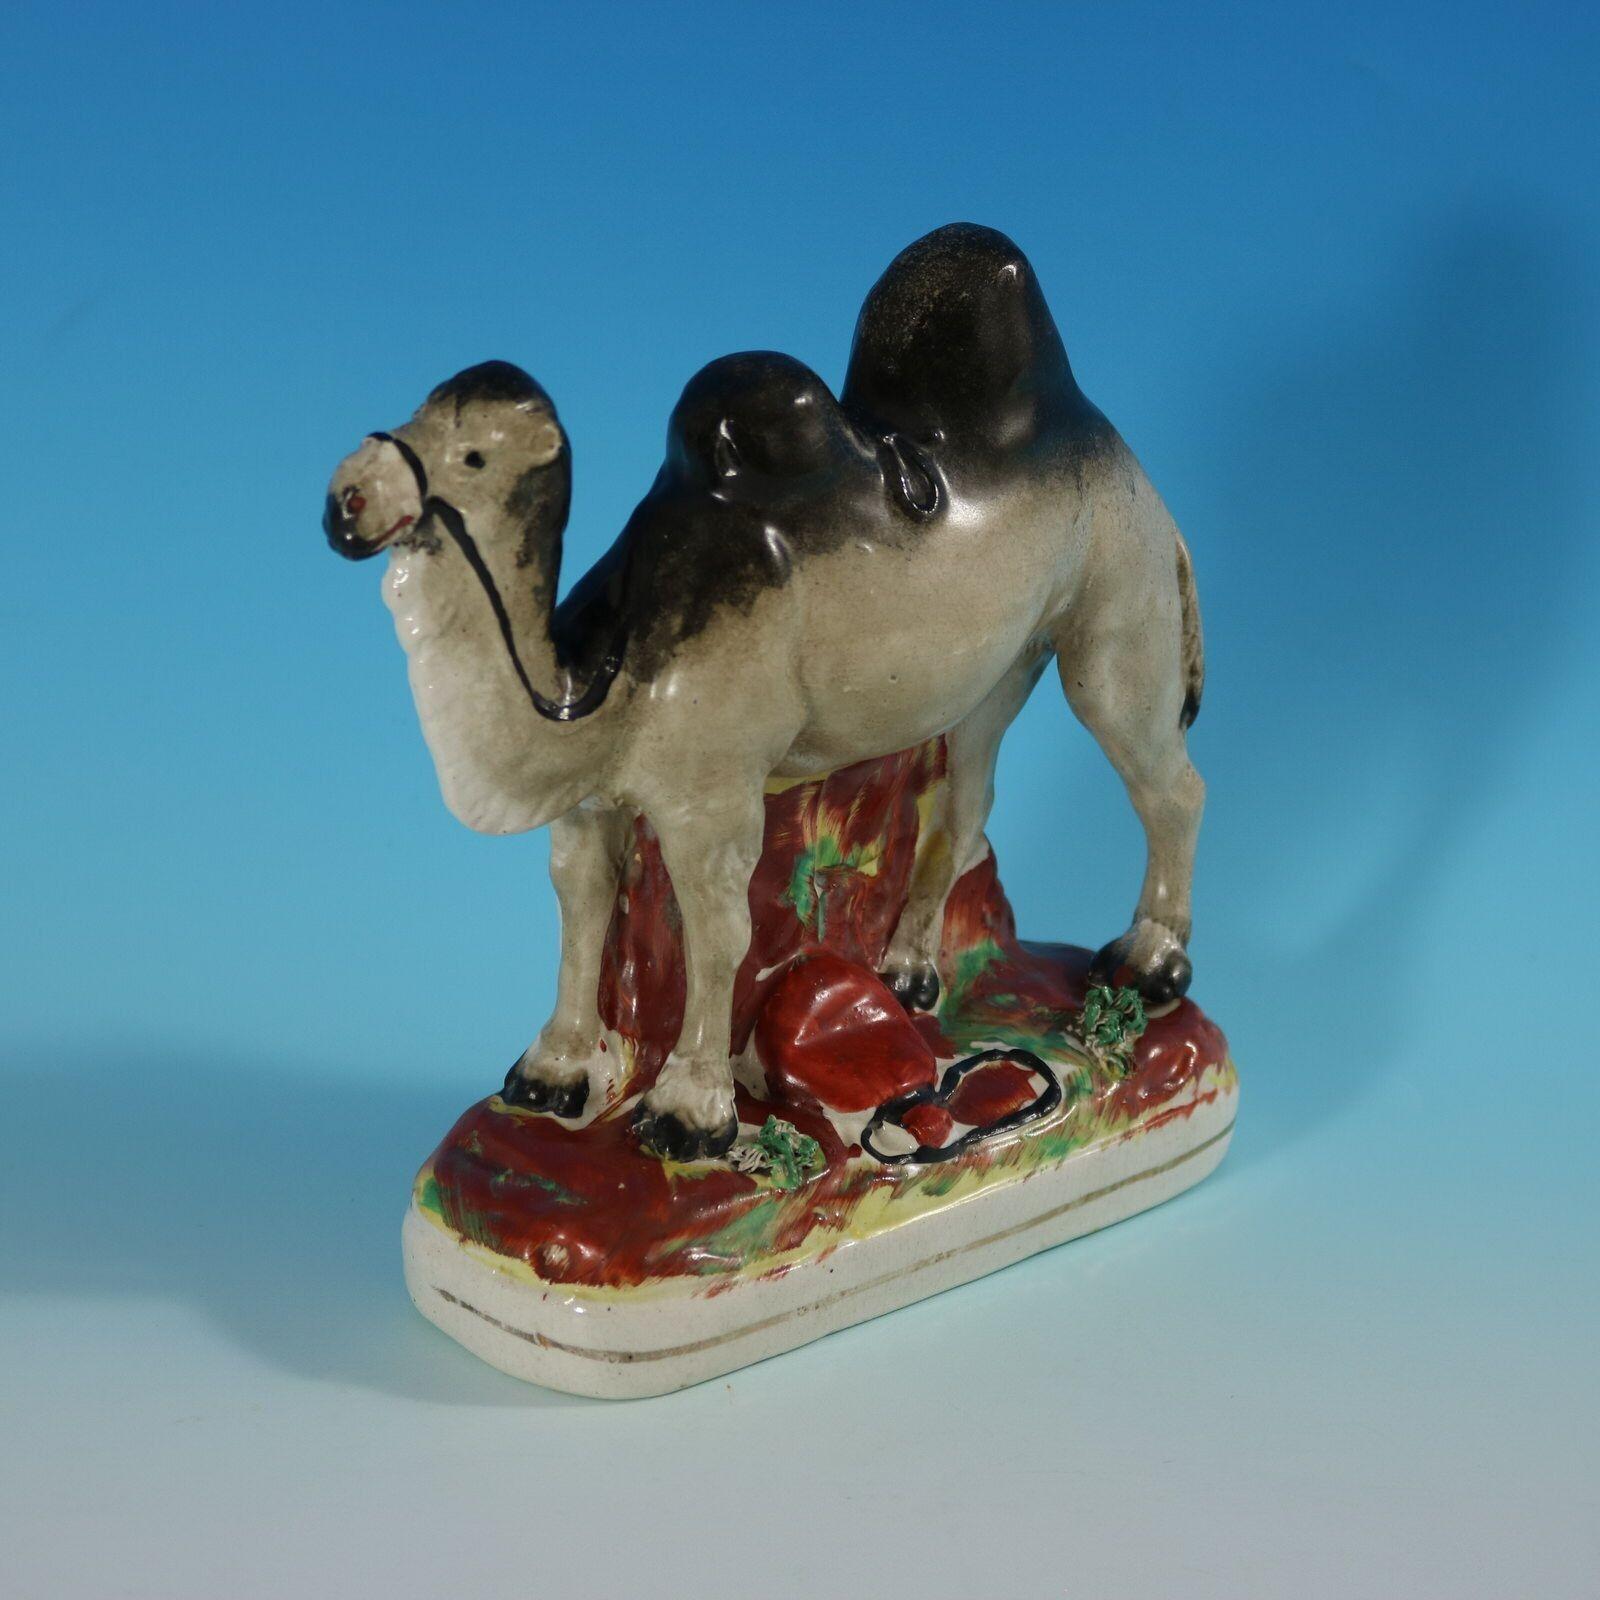 Staffordshire Pottery figure which features a Bactrian camel with a leather water bottle at its feet, stood on an oblong base. Bright gilt base line. Book reference ,'Victorian Staffordshire Figures 1835-1875' Book 3, by A.& N. Harding, page 260,